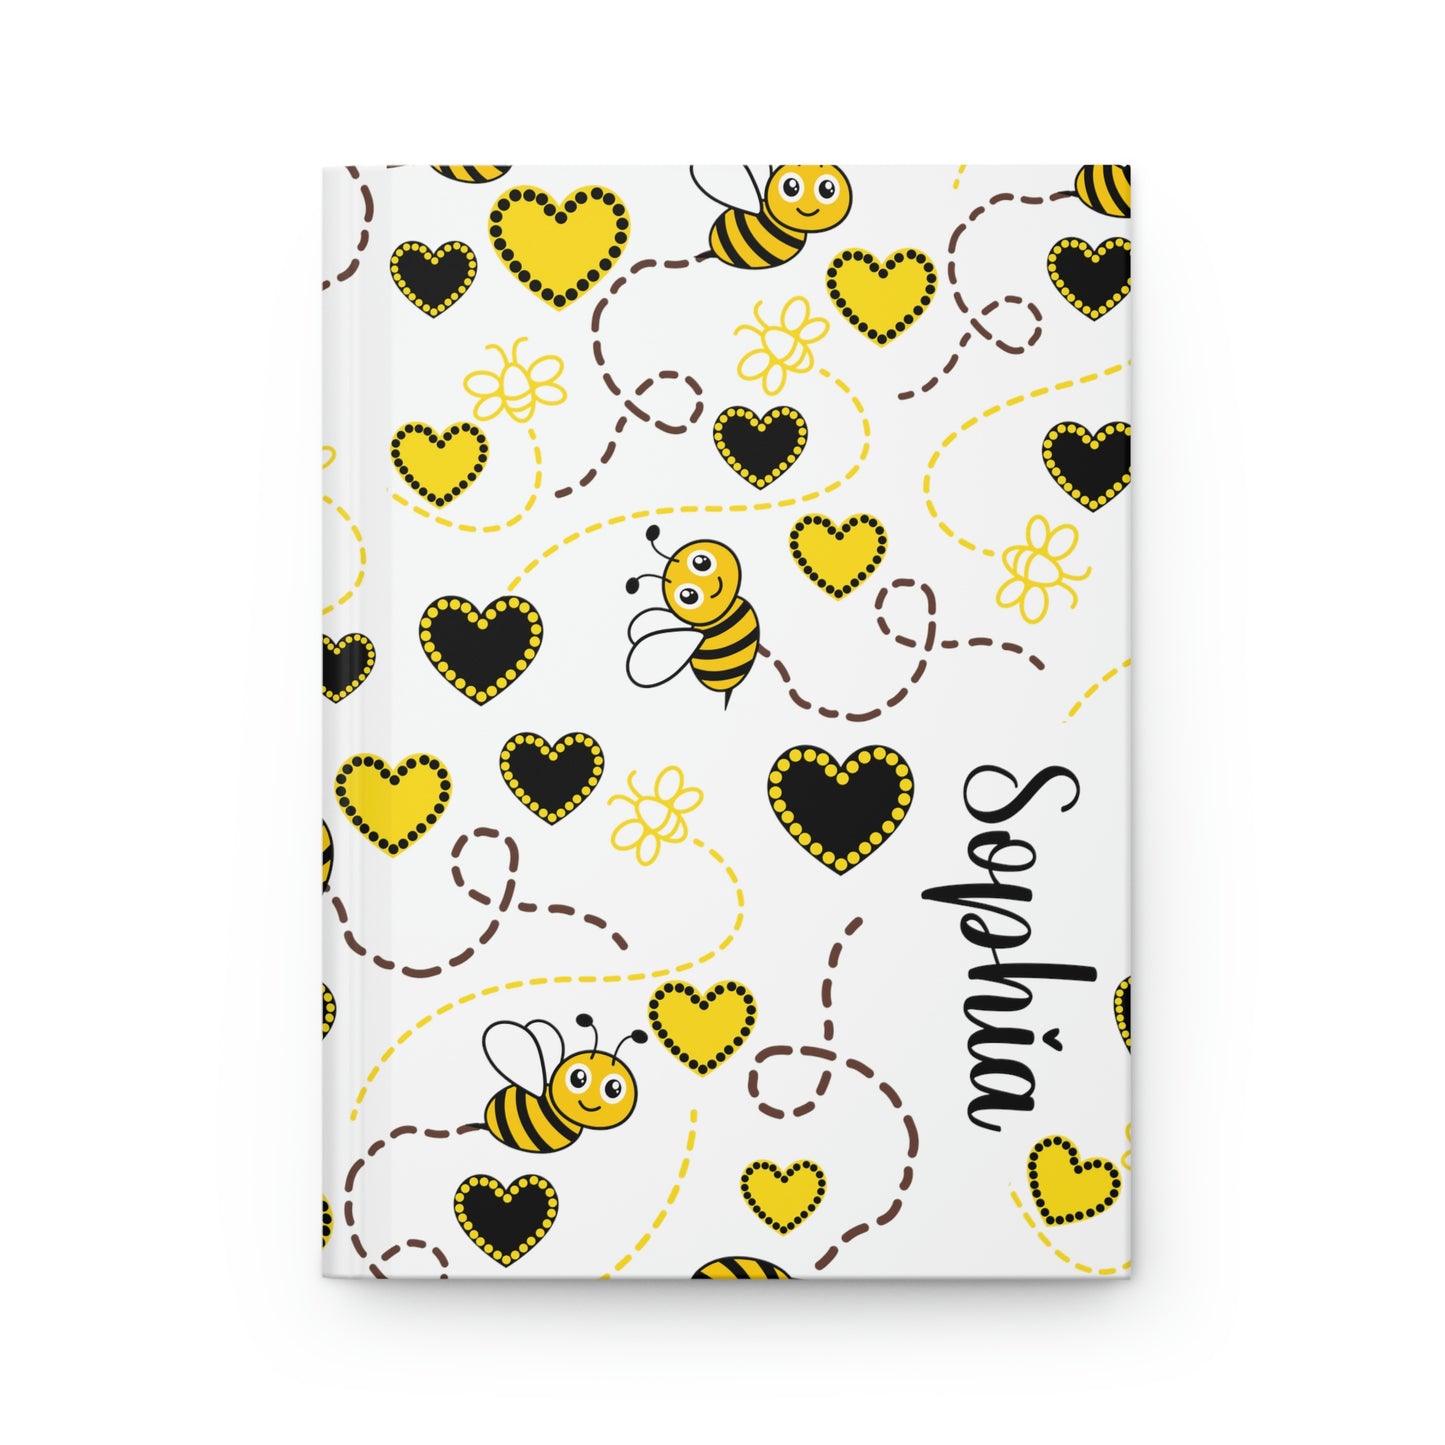 honey bee summer journal in black and yellow with bumble bees and hearts